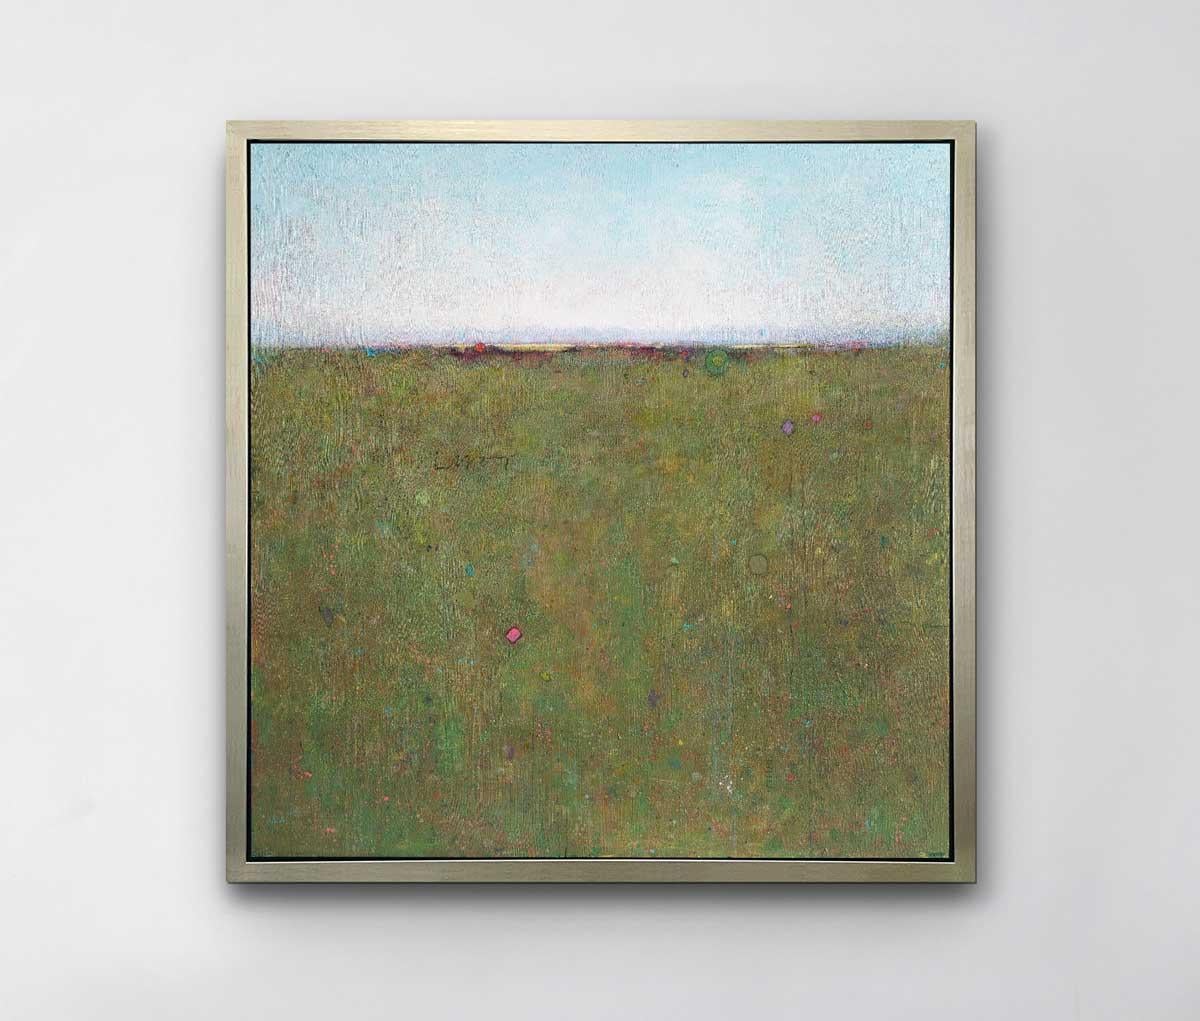 This limited edition print is an abstract landscape by Elwood Howell. Below a high horizon line, a blend of earth colors are layered together with specks of colorful shapes throughout. Above the line, lavender and white fade to light blue up at the